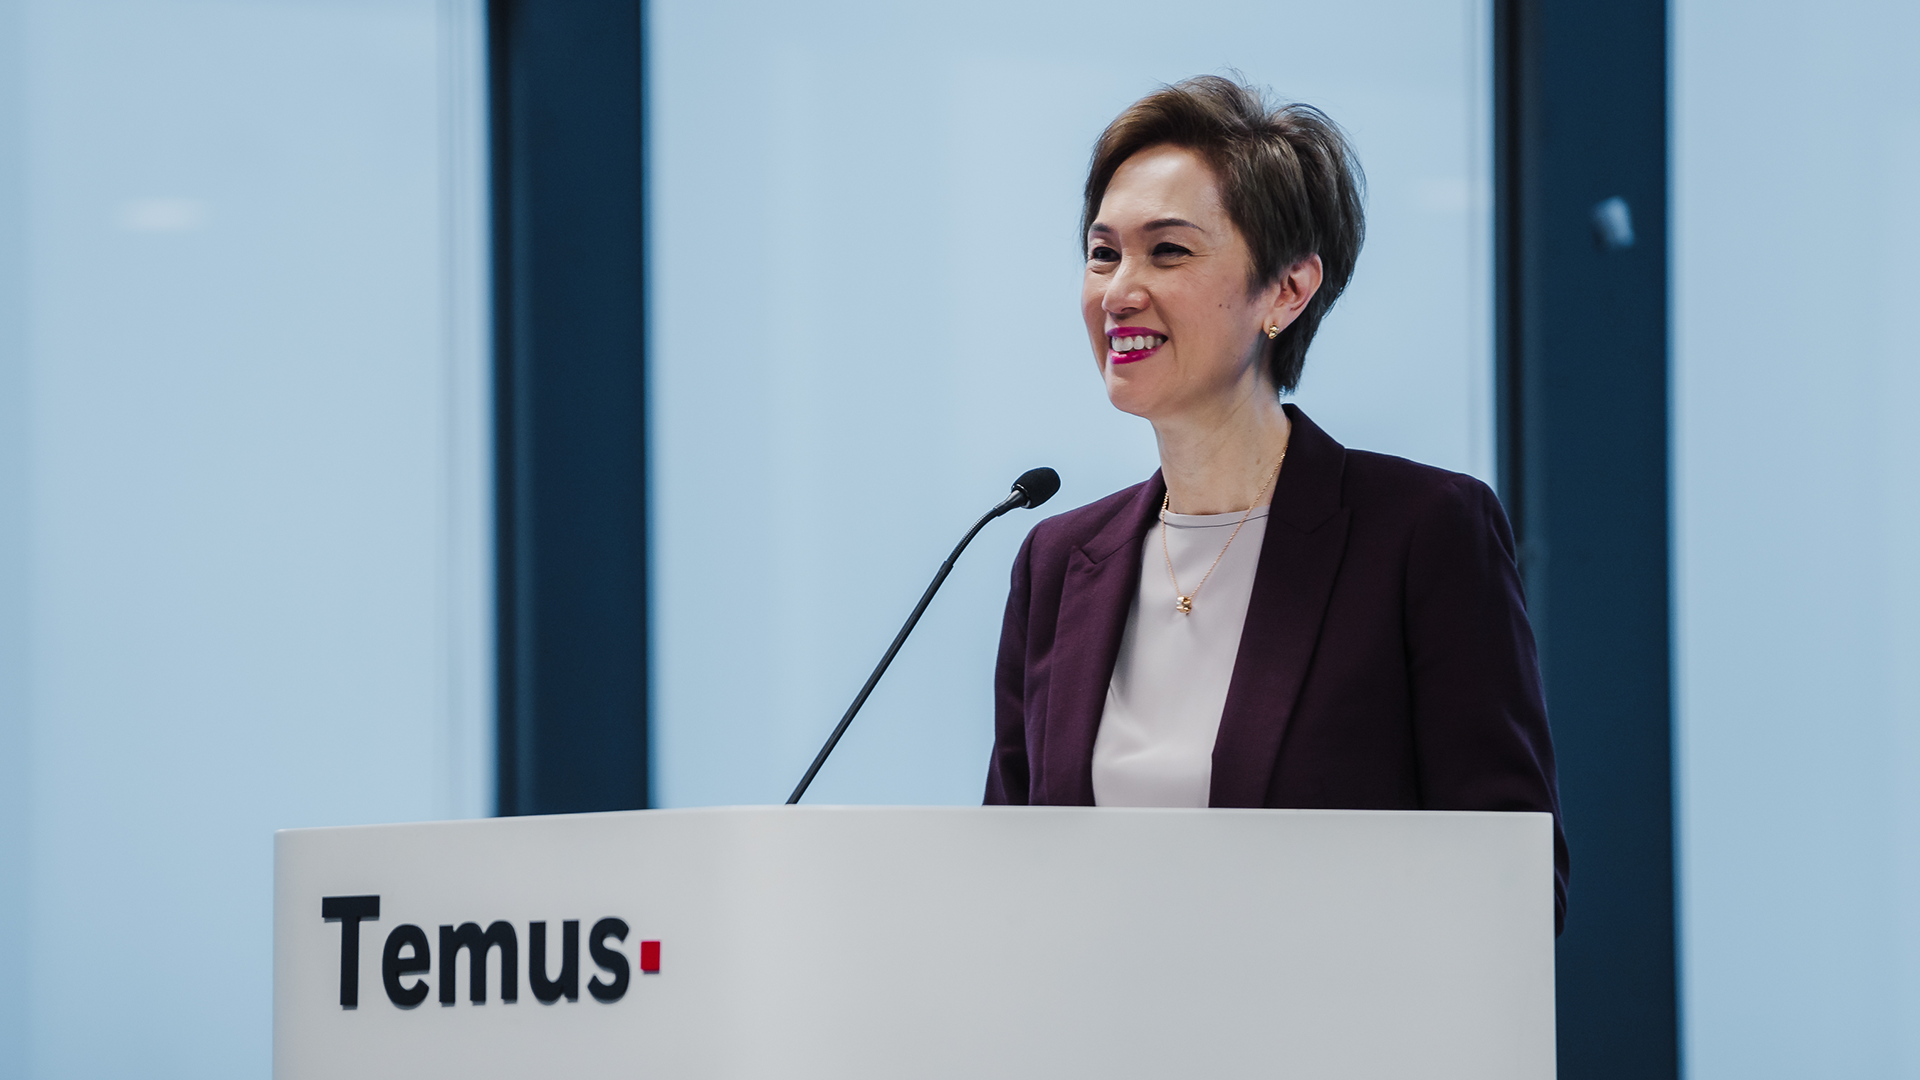 Speech by Minister Josephine Teo at the launch of Temus' Step IT Up Programme